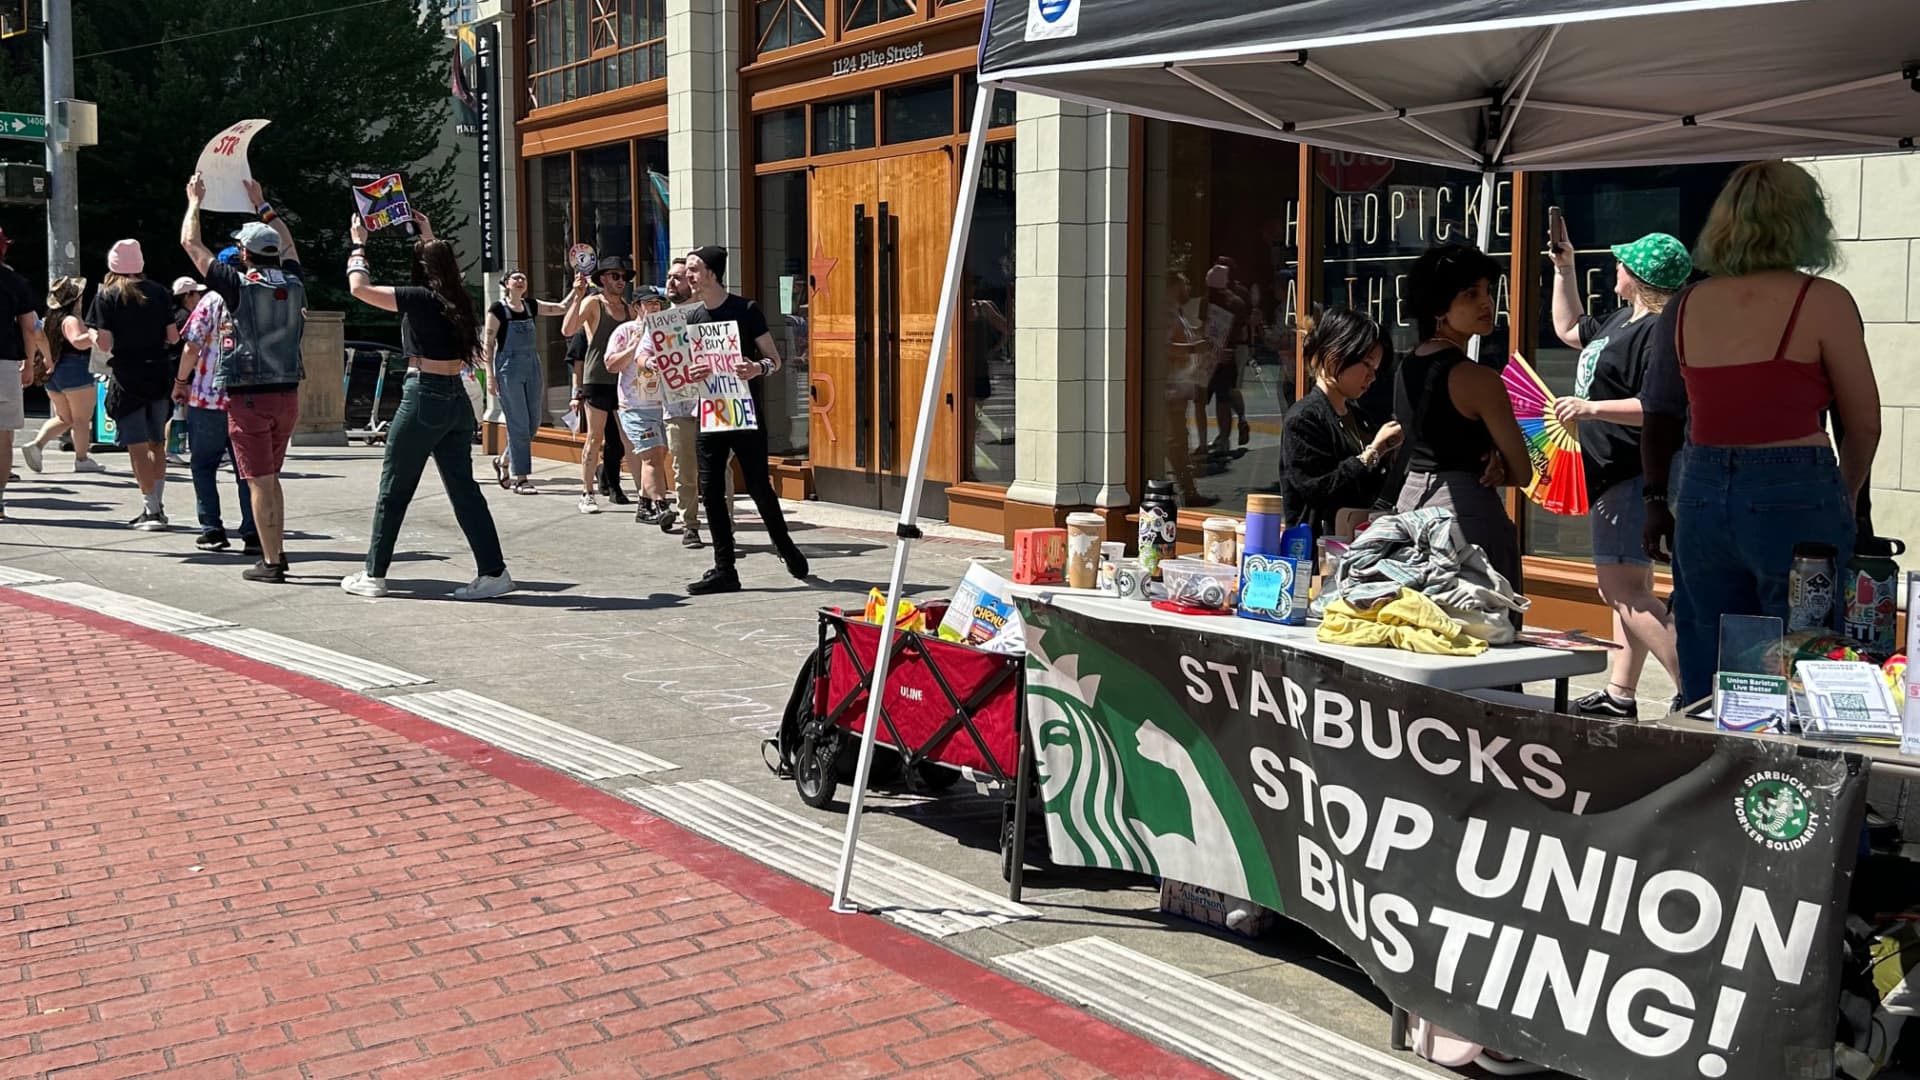 Protesters in Seattle join a Starbucks Workers United strike over what the union alleges is a change in policy over Pride décor in stores. Starbucks maintains it has not changed its policies and encourages stores to celebrate within the company's security and safety guidelines, while the union alleges workers in 22 states where workers have not been able to decorate.